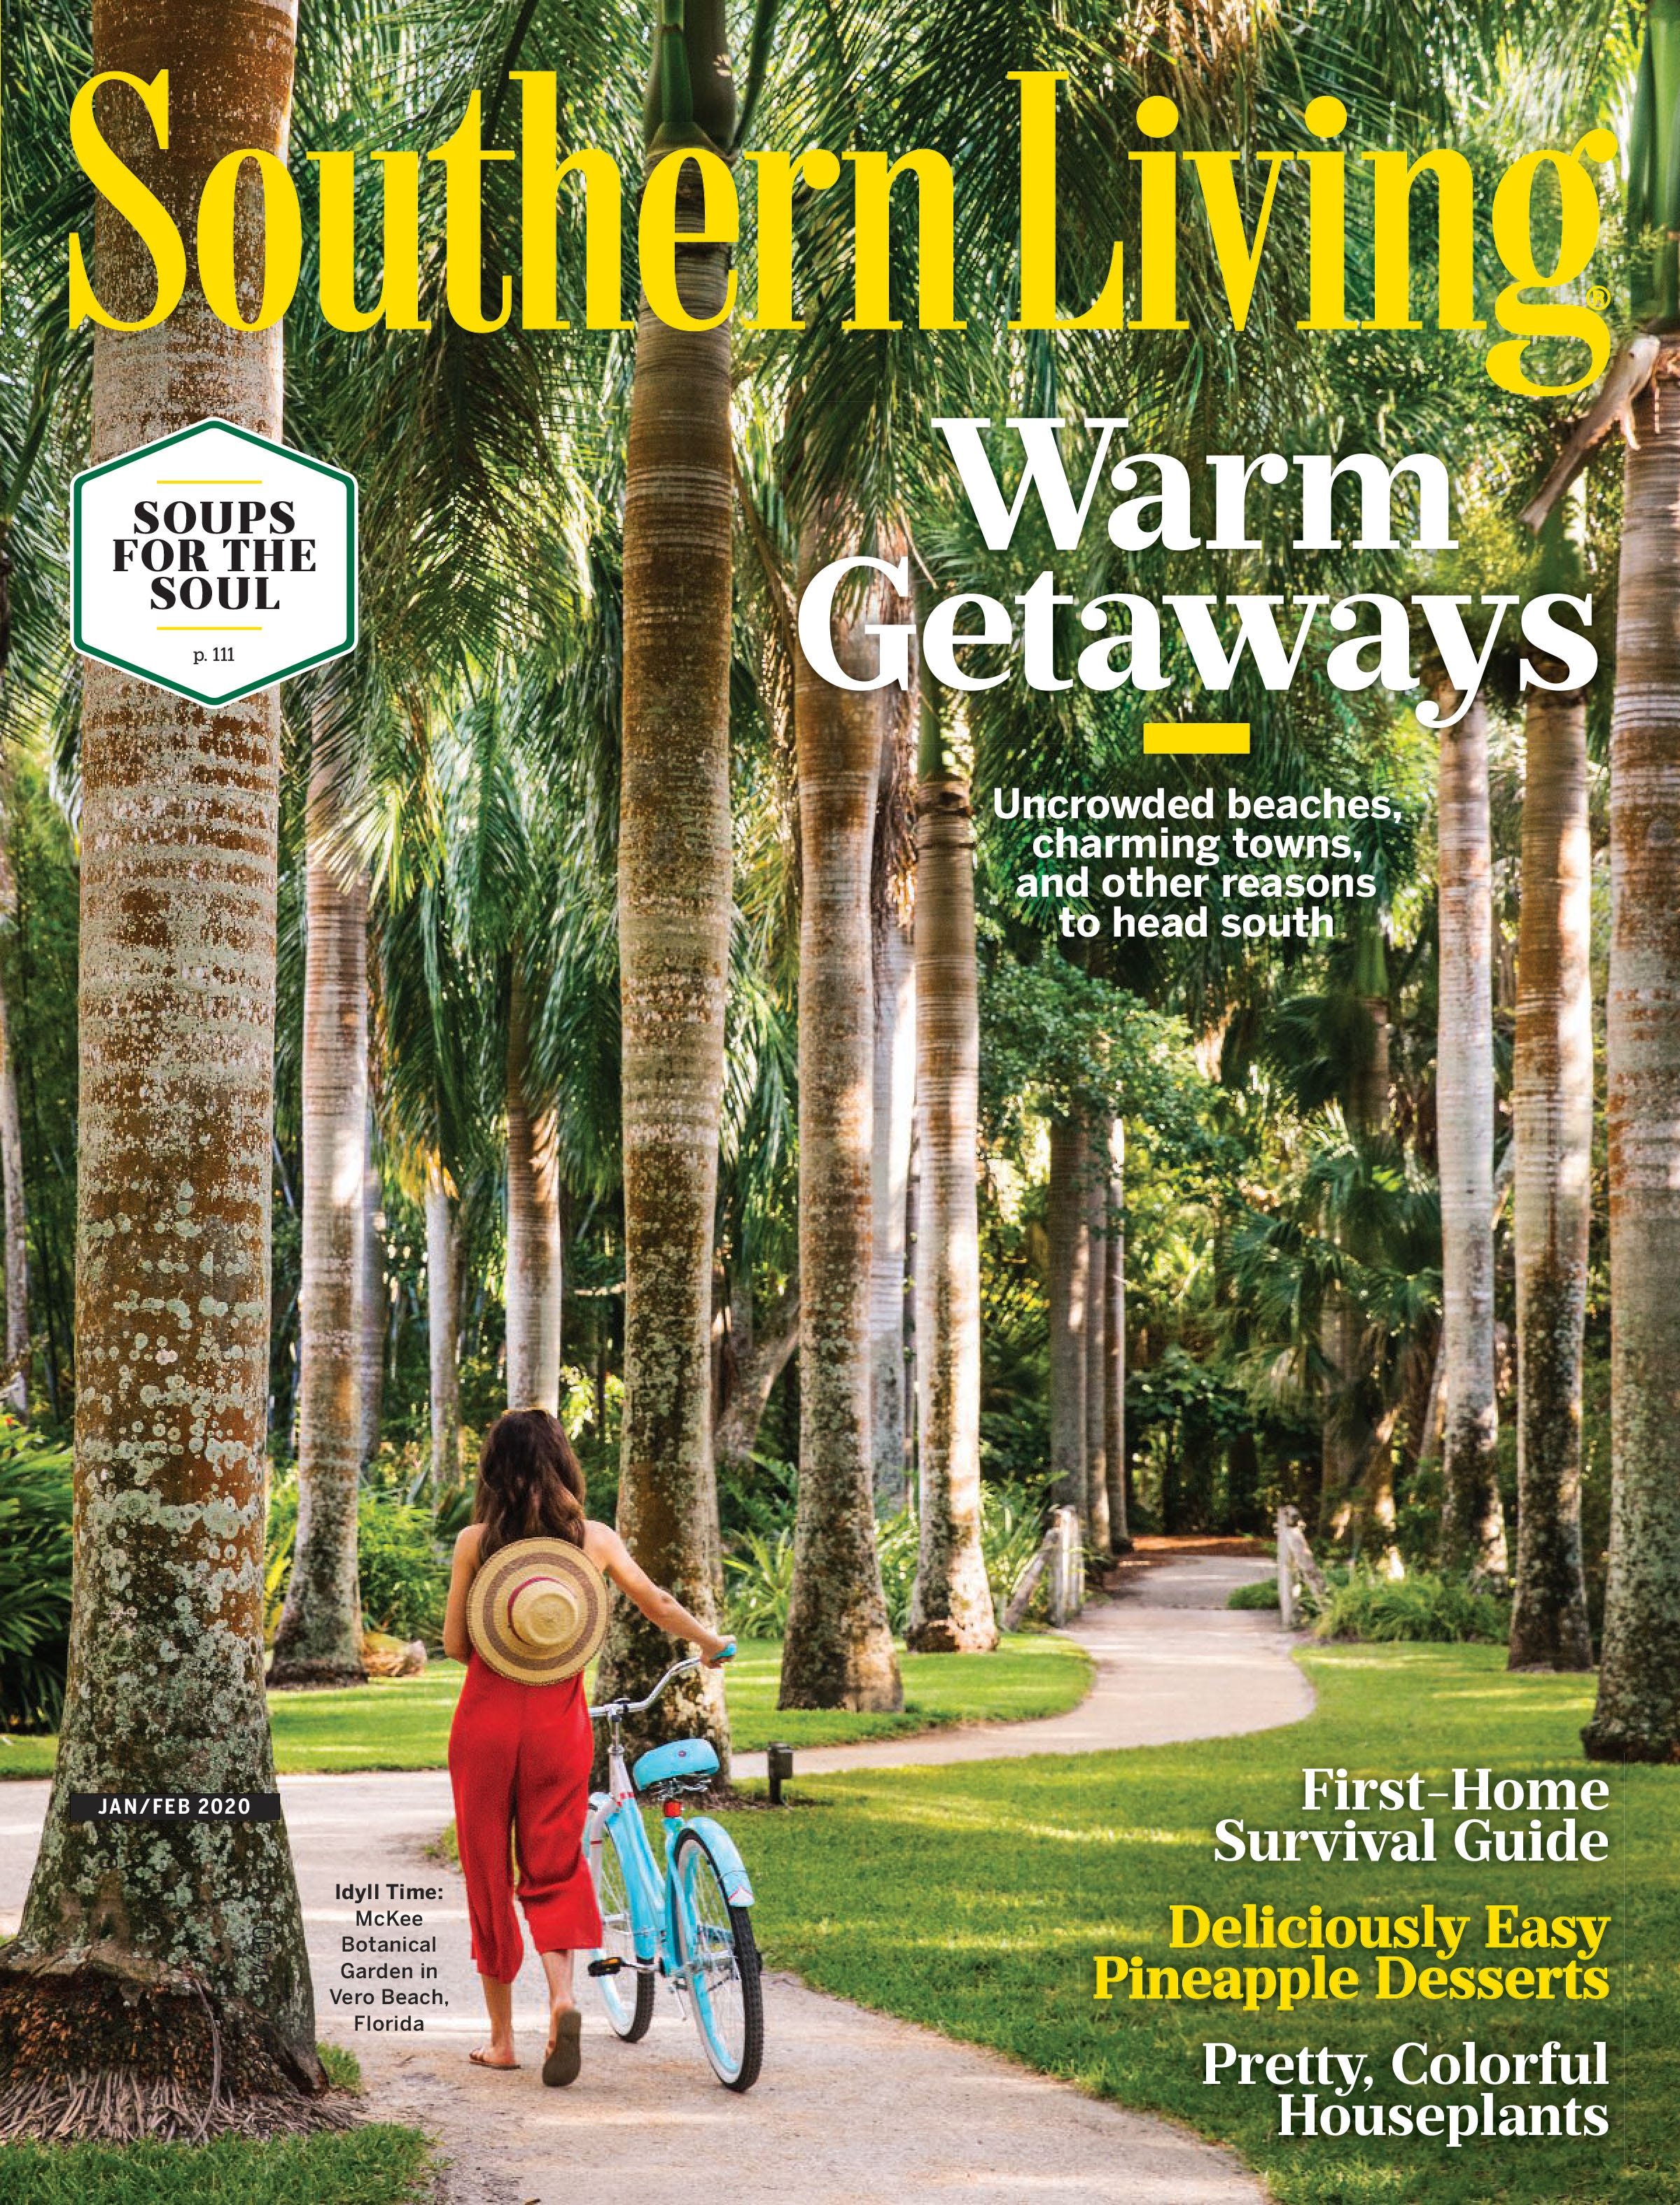 Mckee Botanical Garden Featured On Cover Of Southern Living Magazine